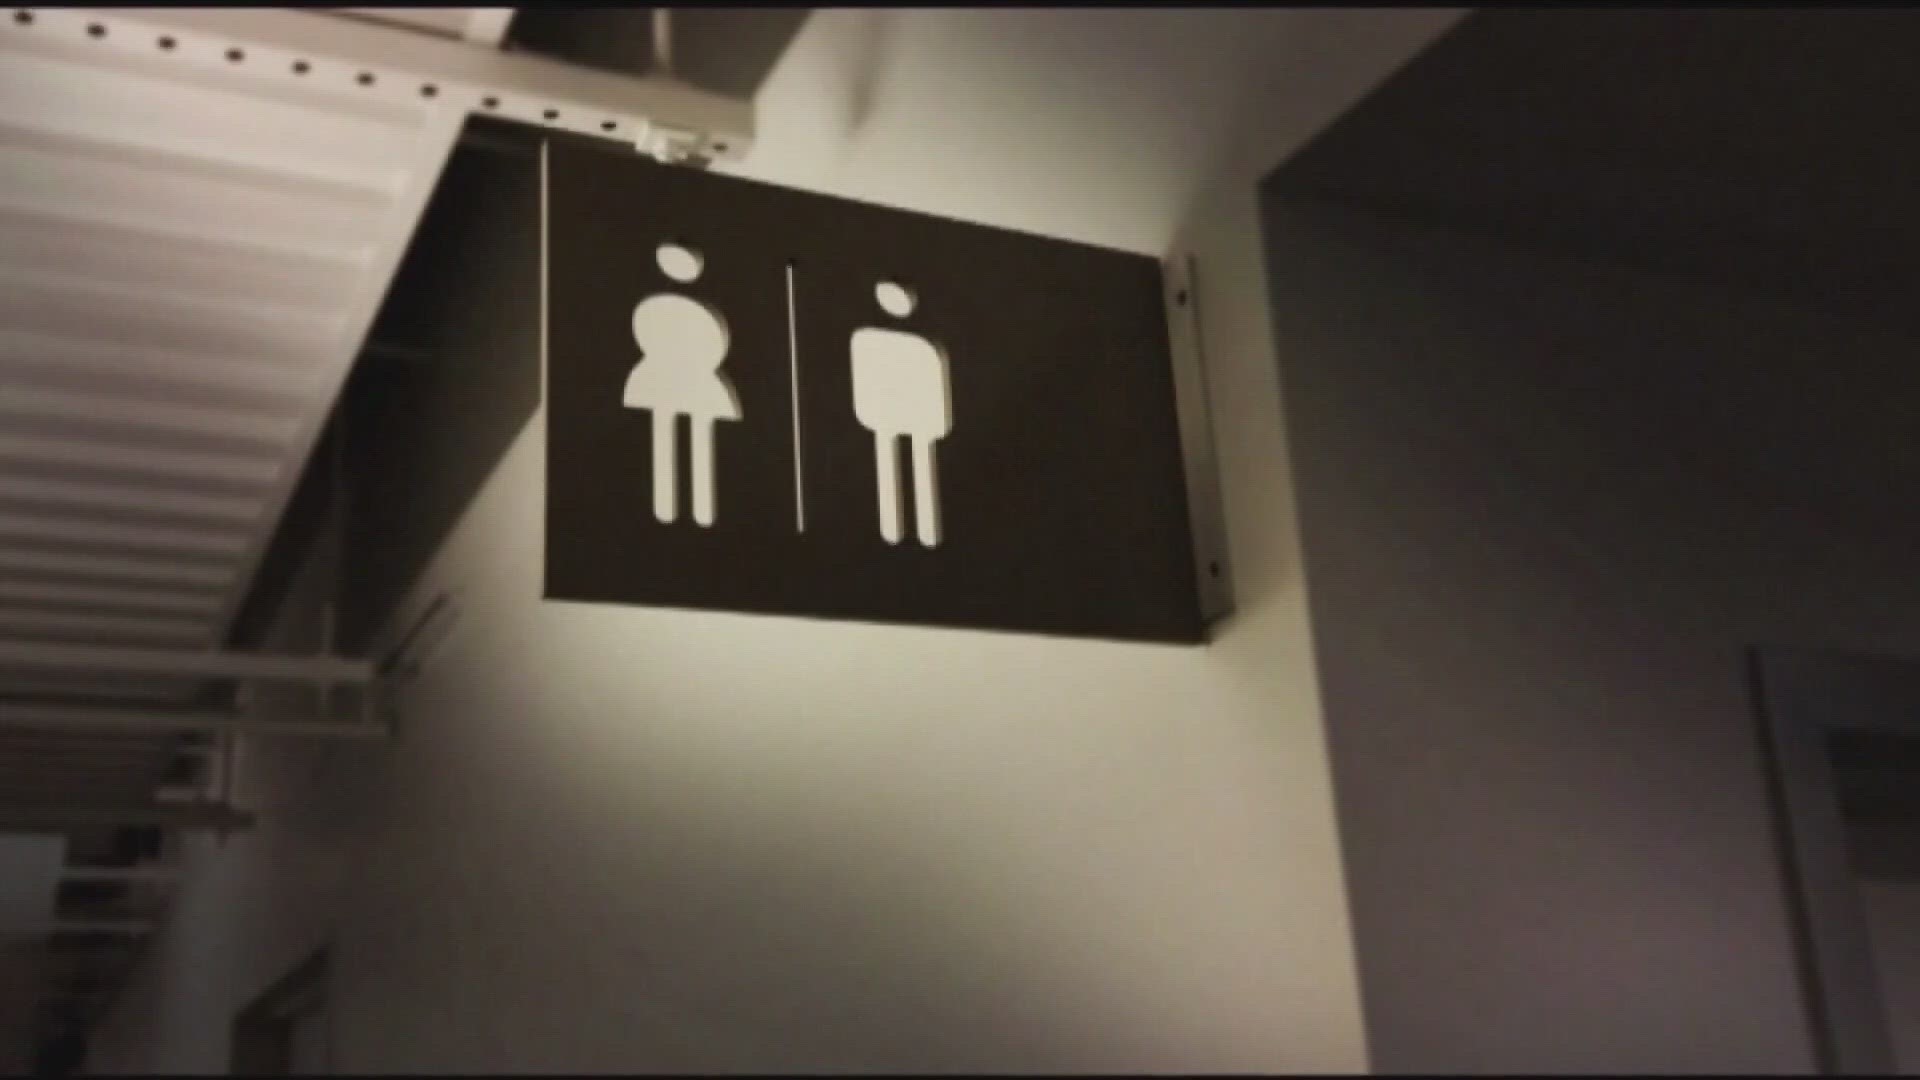 This comes after Gov. Brad Little signed the "Bathroom Bill," requiring schools to maintain separate restrooms and changing areas designated as male or female only.